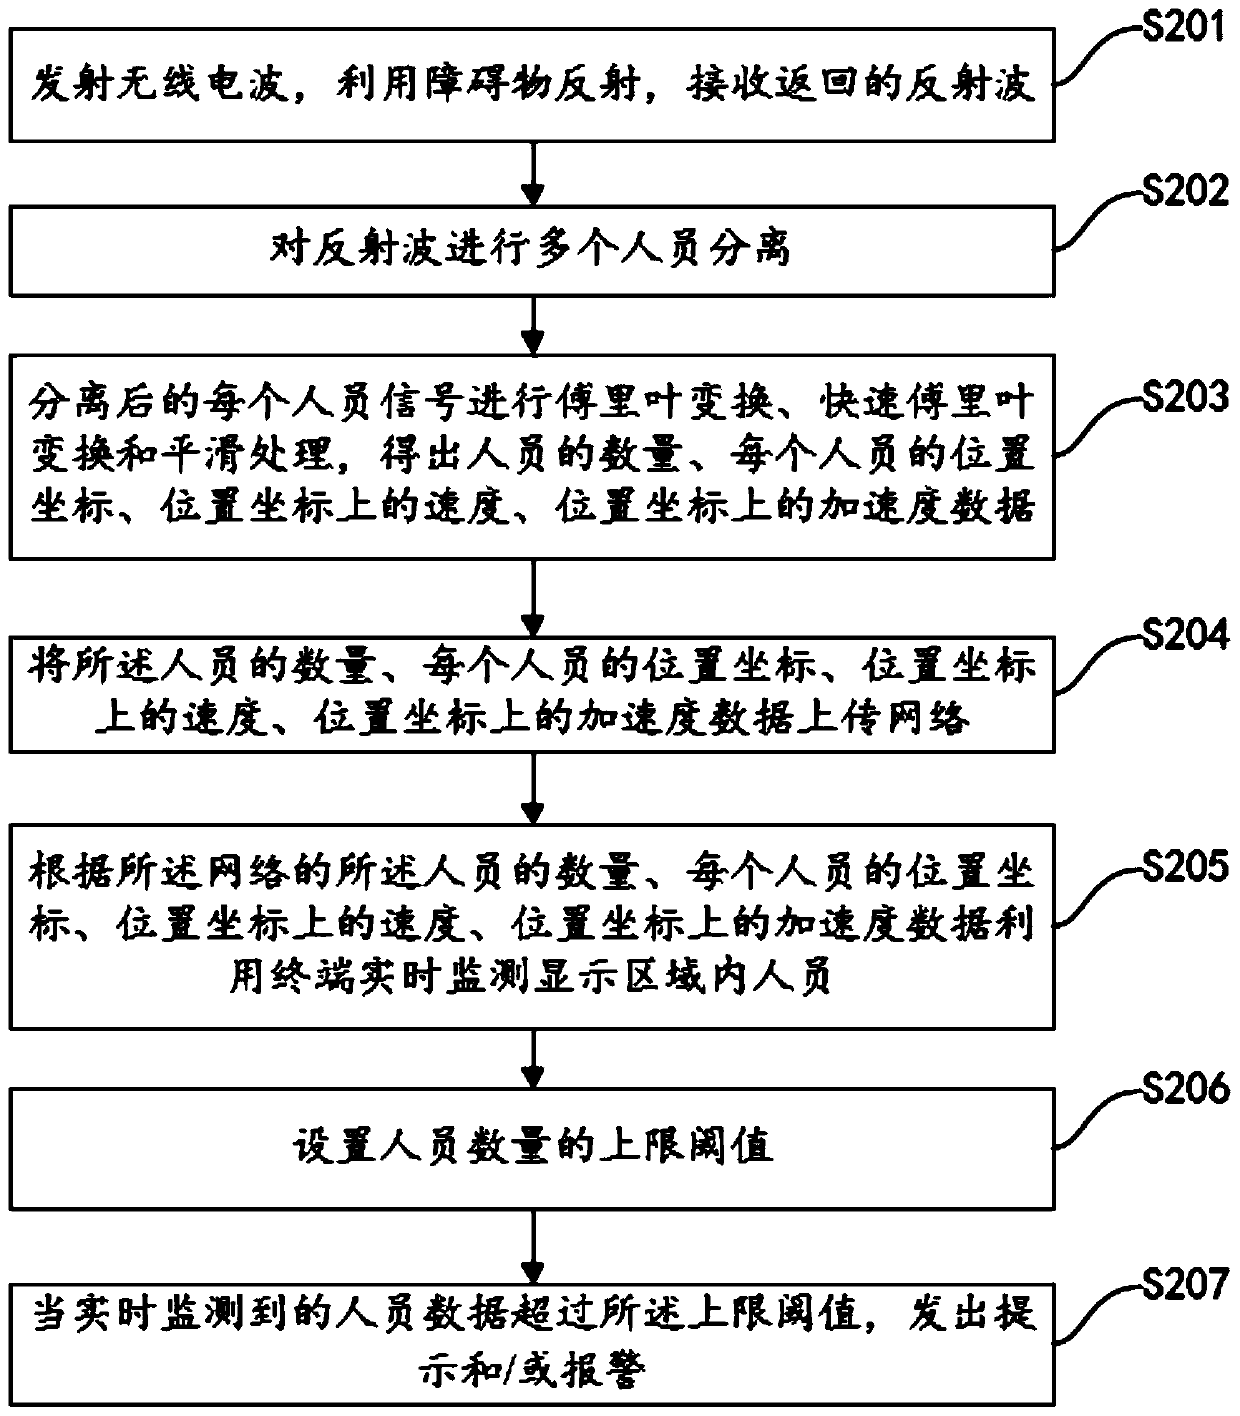 Radar personnel monitoring and measuring system and method